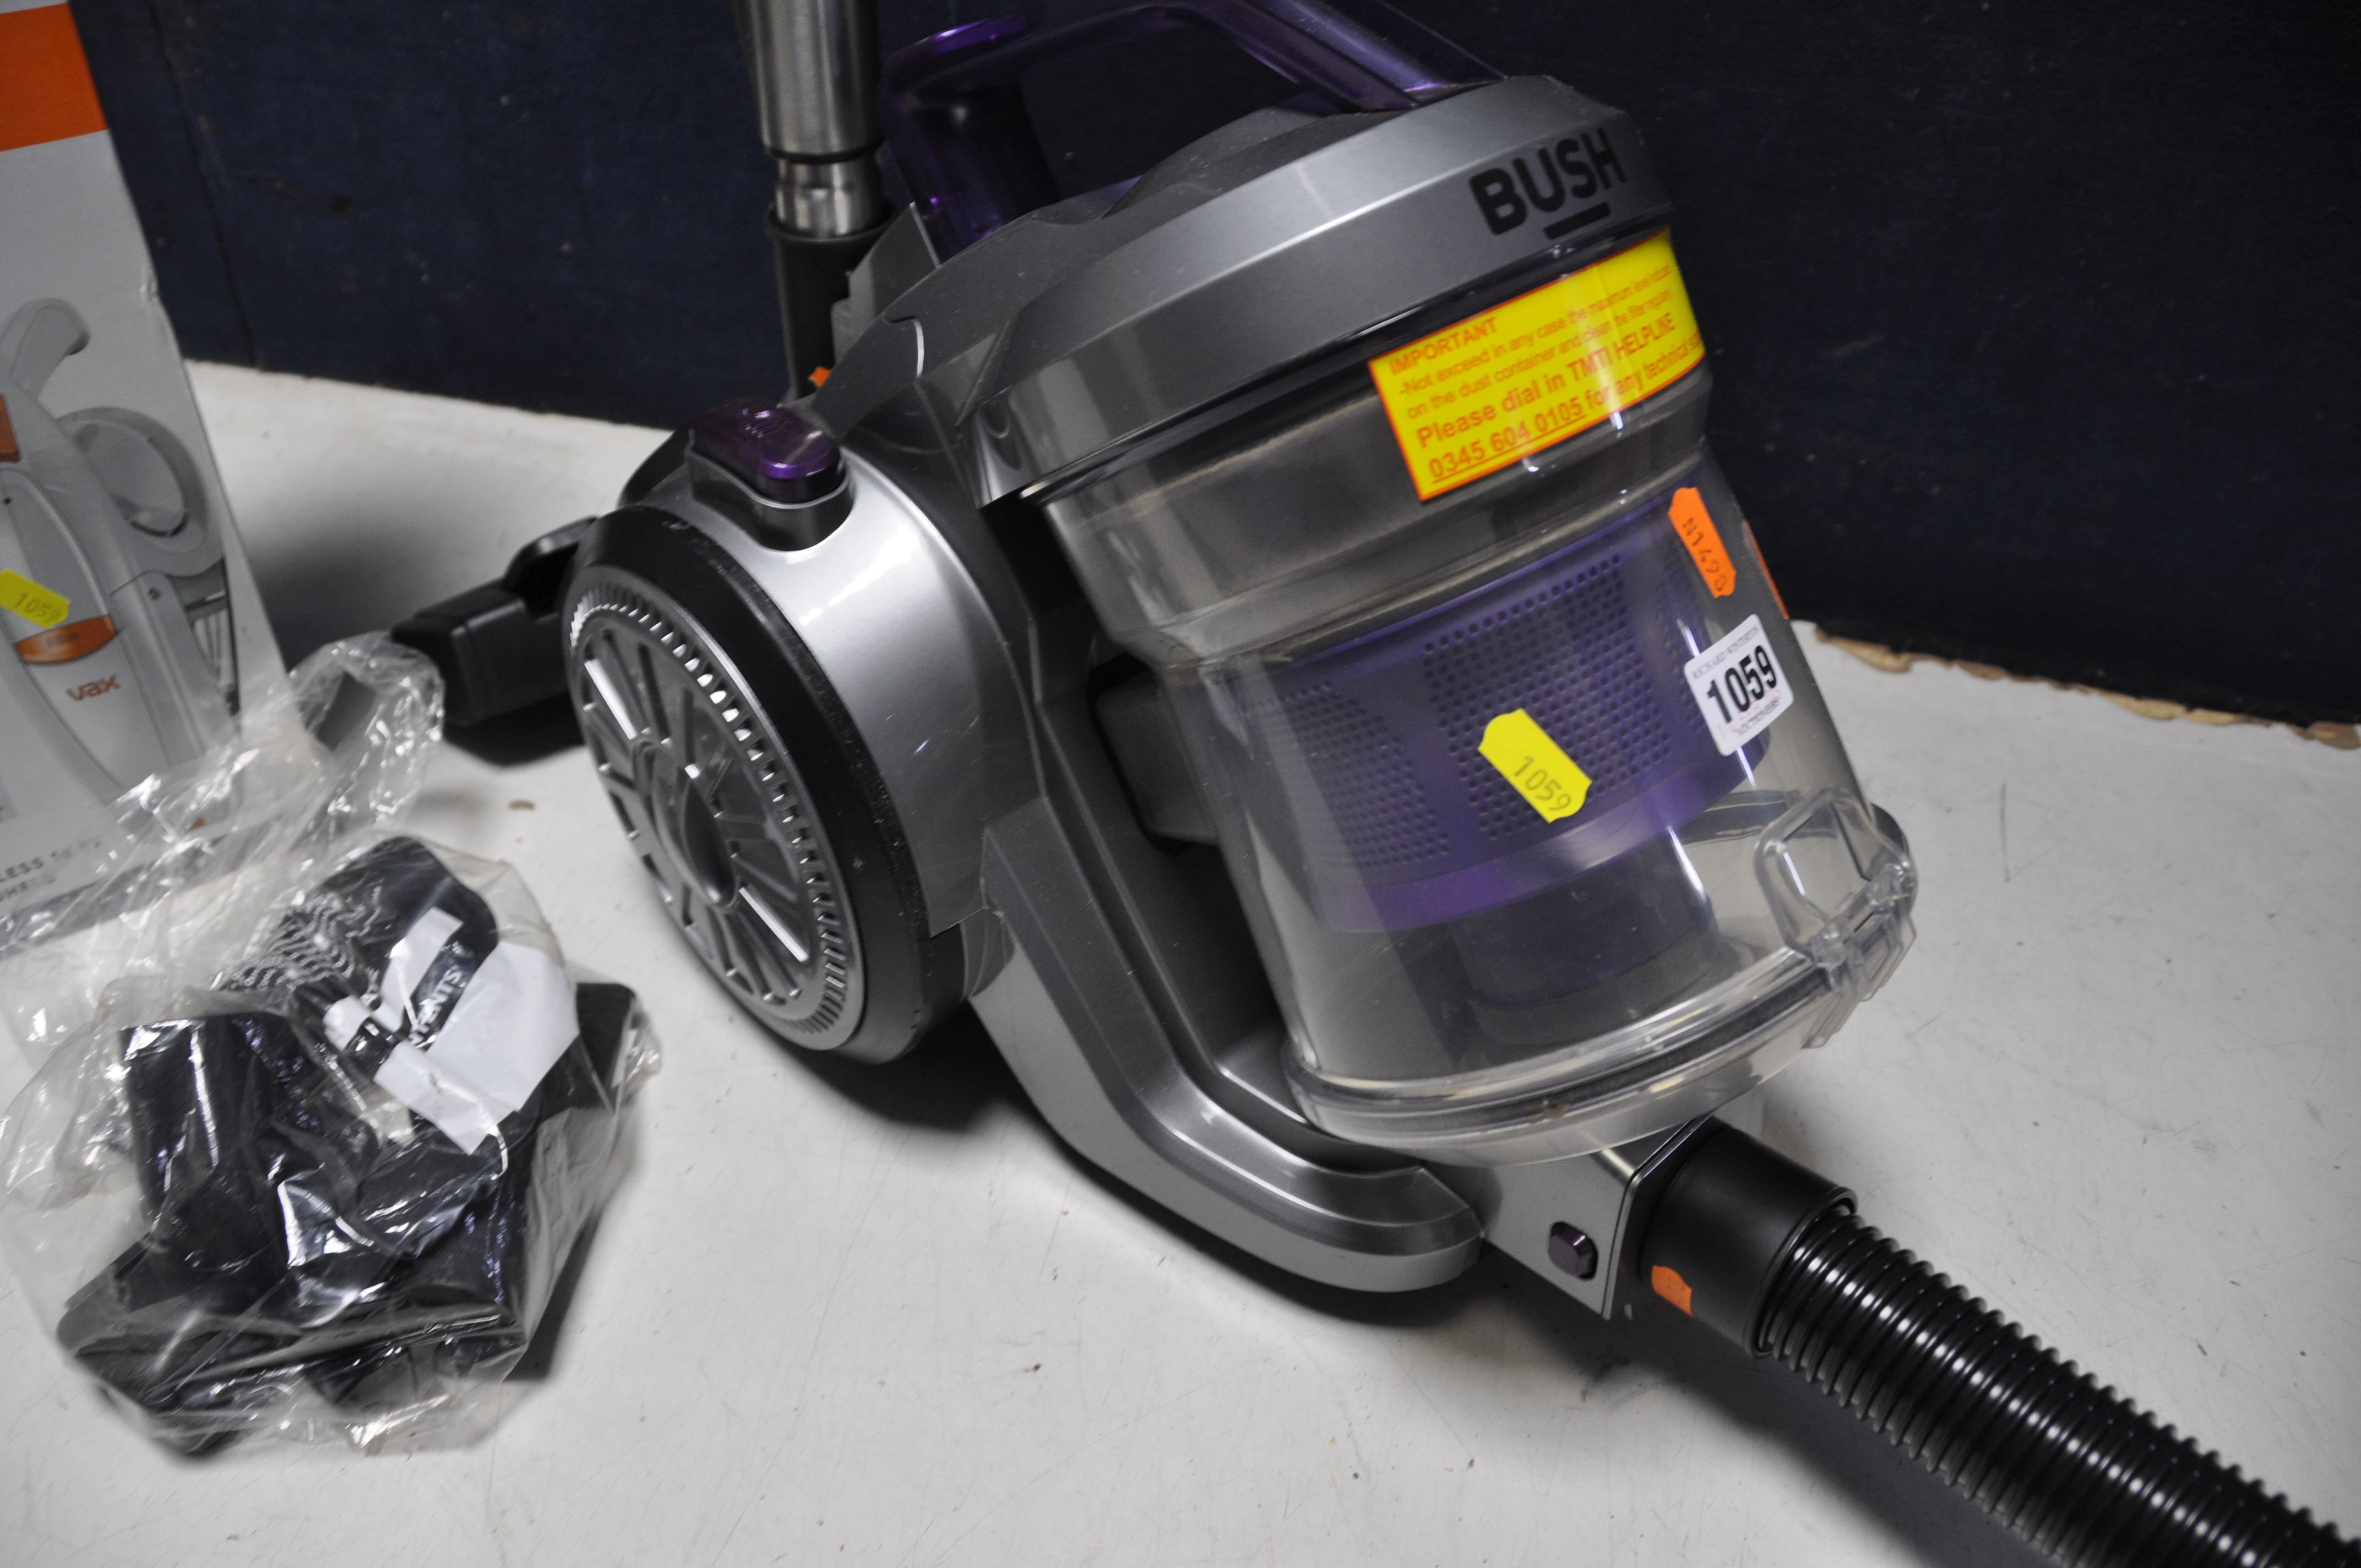 A BUSH BT-ZW-9031SO8 VACUUM CLEANER along with a Vax H85-GA-B10 cordless handheld vacuum cleaner ( - Image 2 of 3